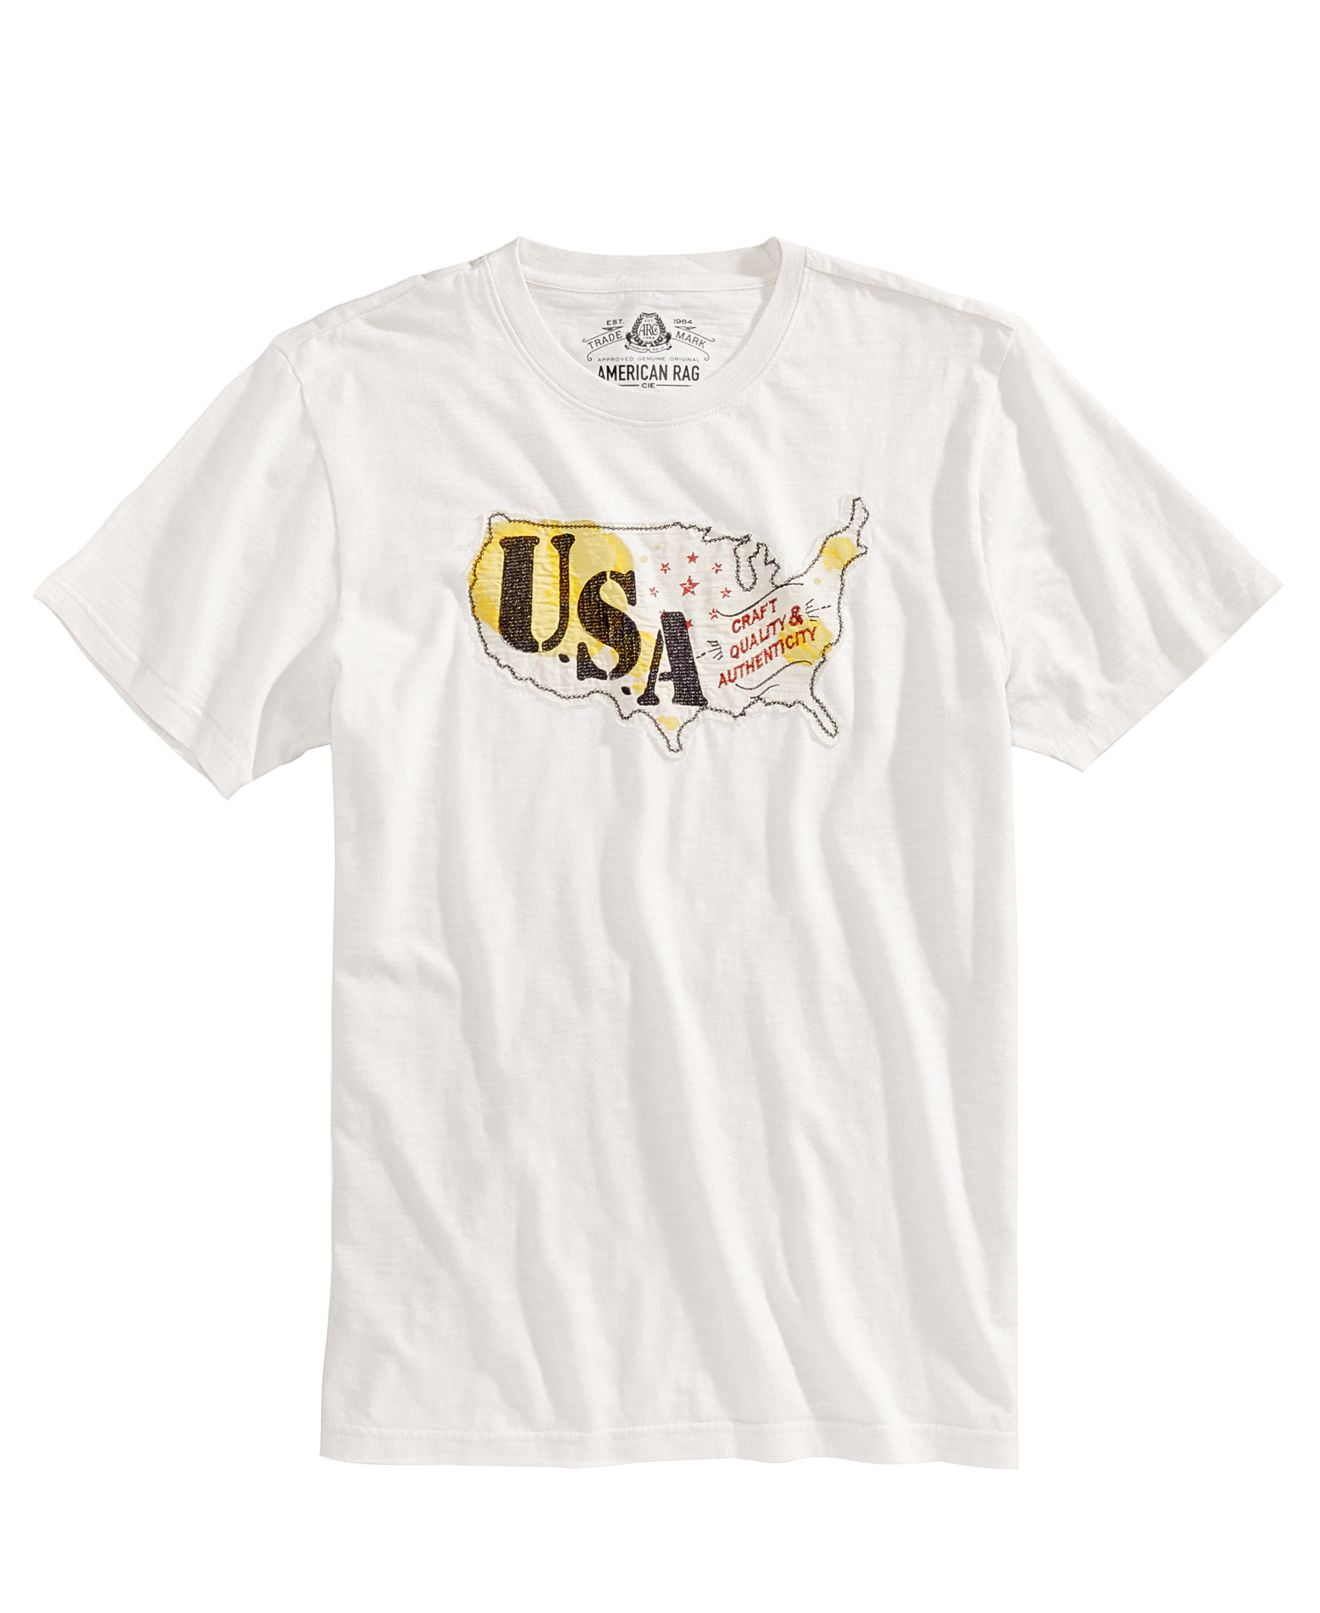 American Rag T-Shirts - American Rag Mens Embroidered Graphic Tee T ...